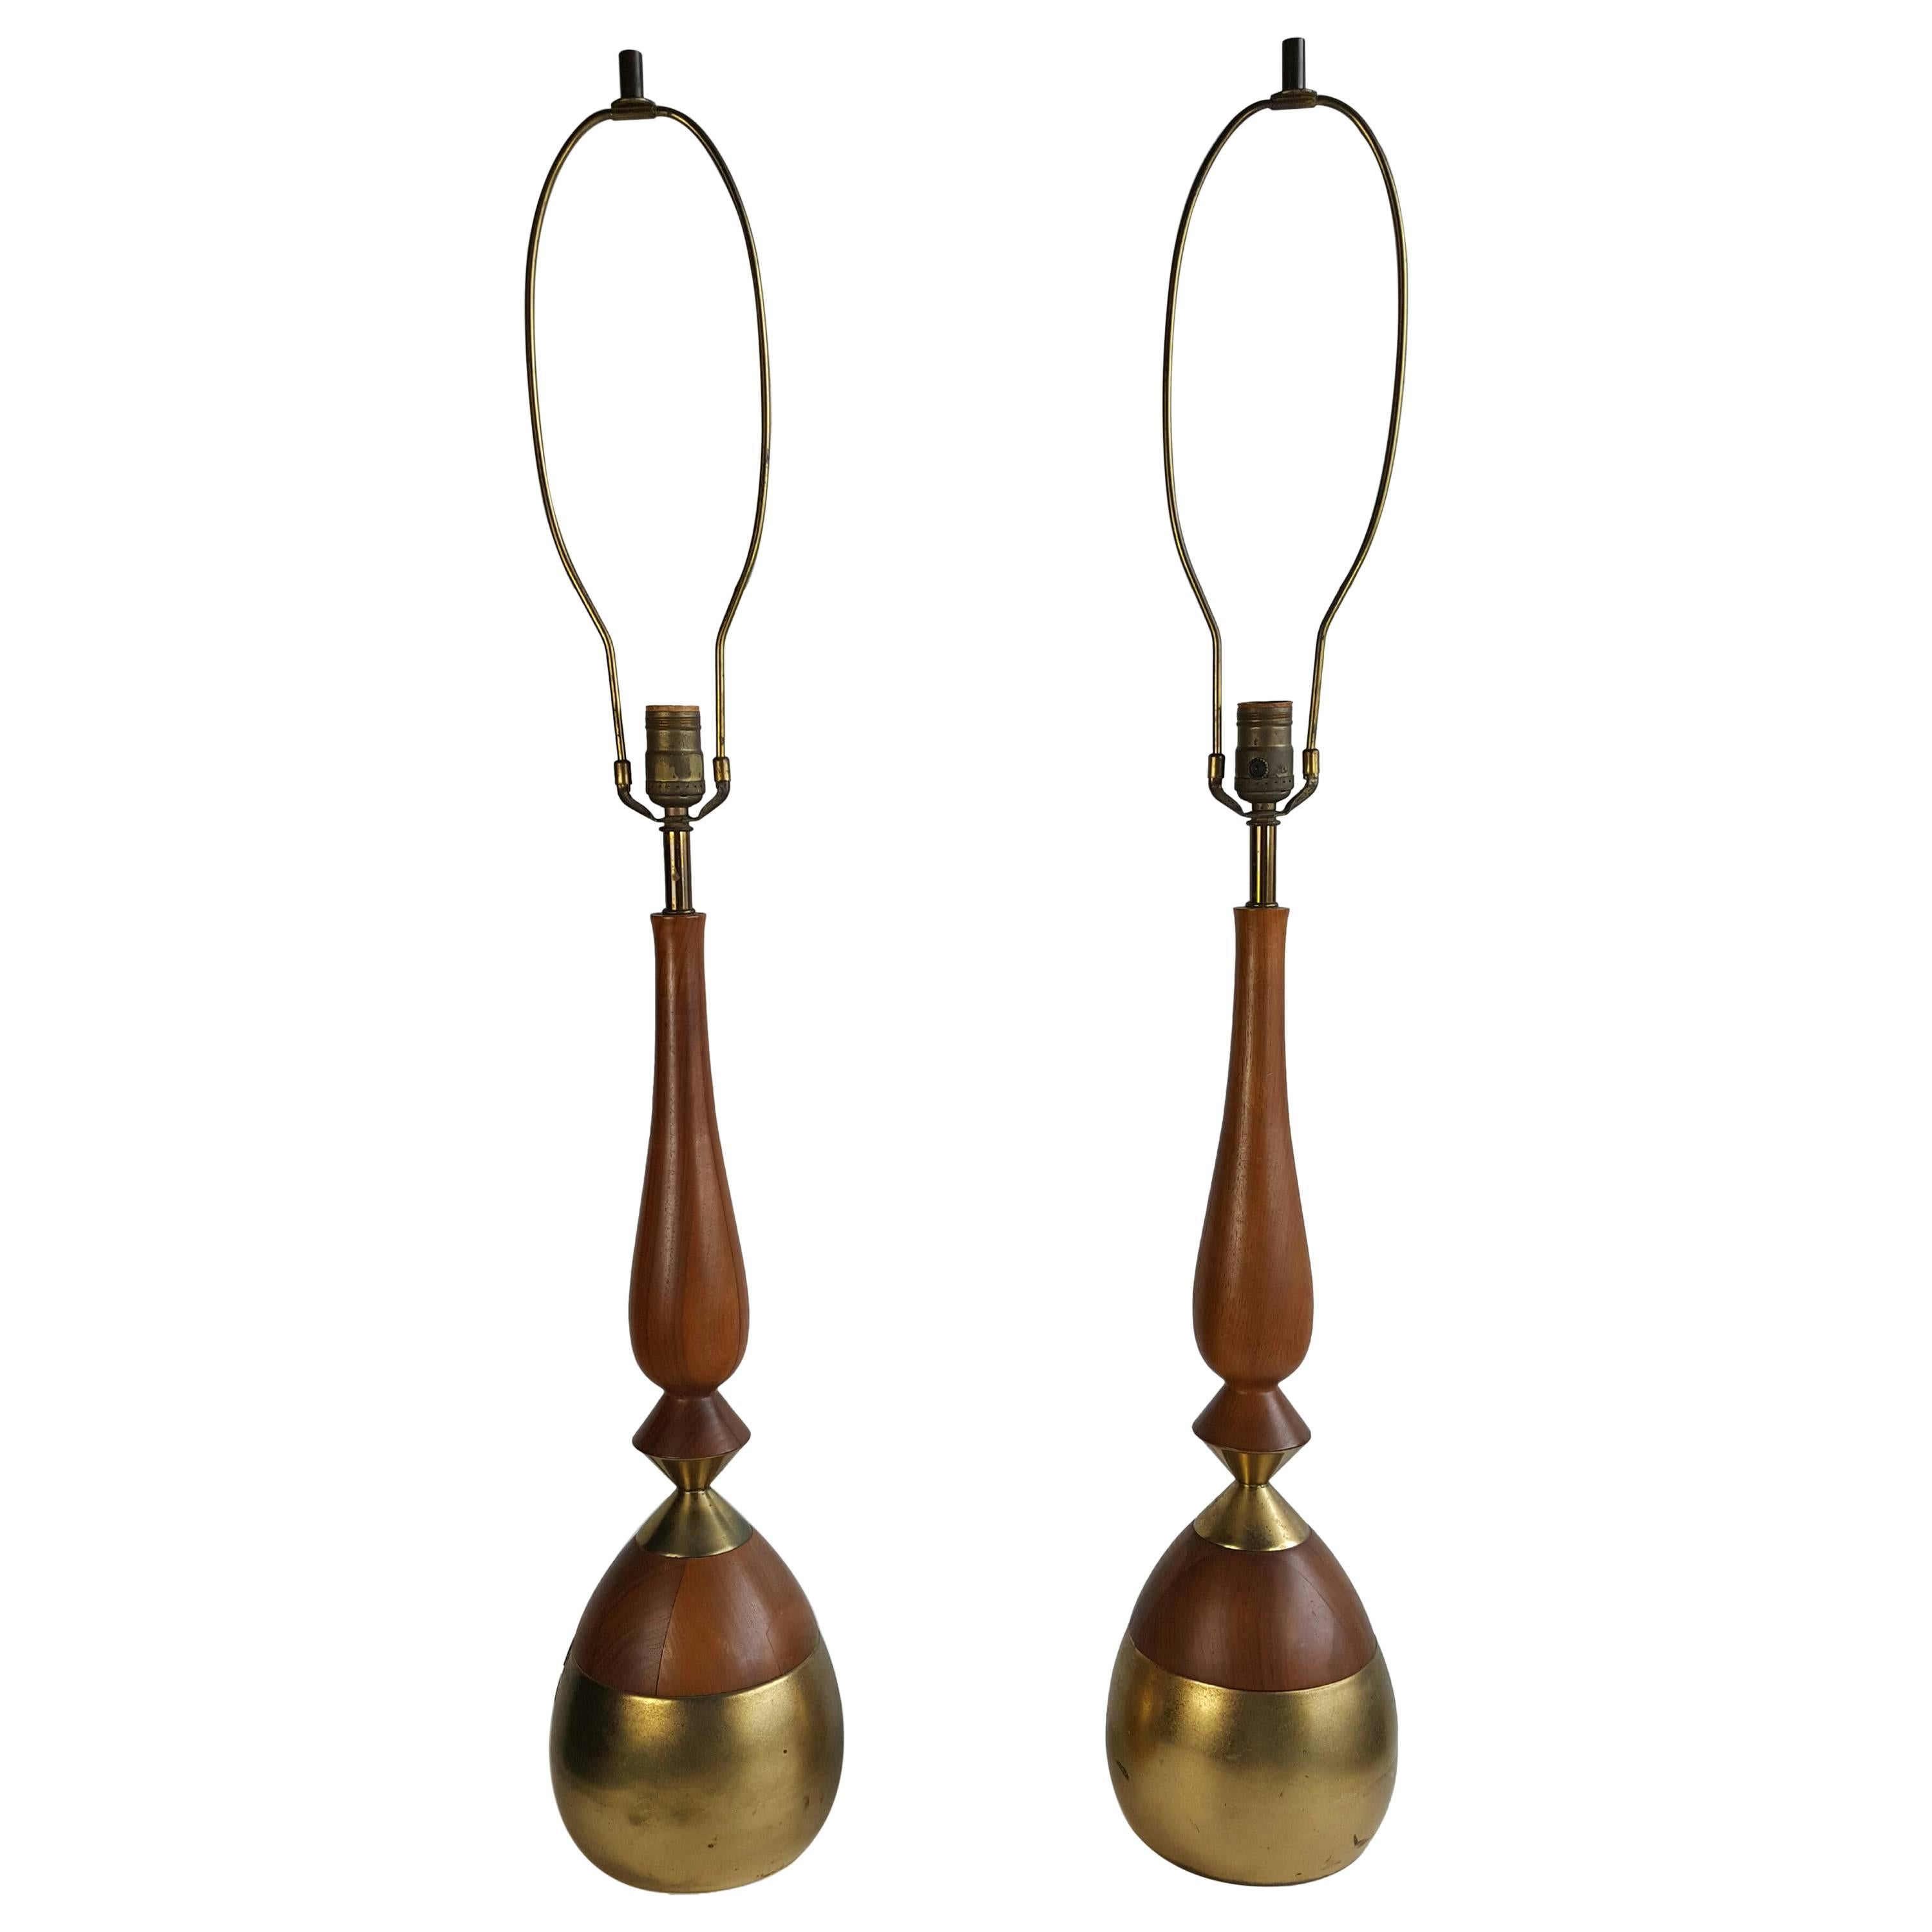 Pair of Classic Modernist Walnut and Brass Lamps by Tony Paul